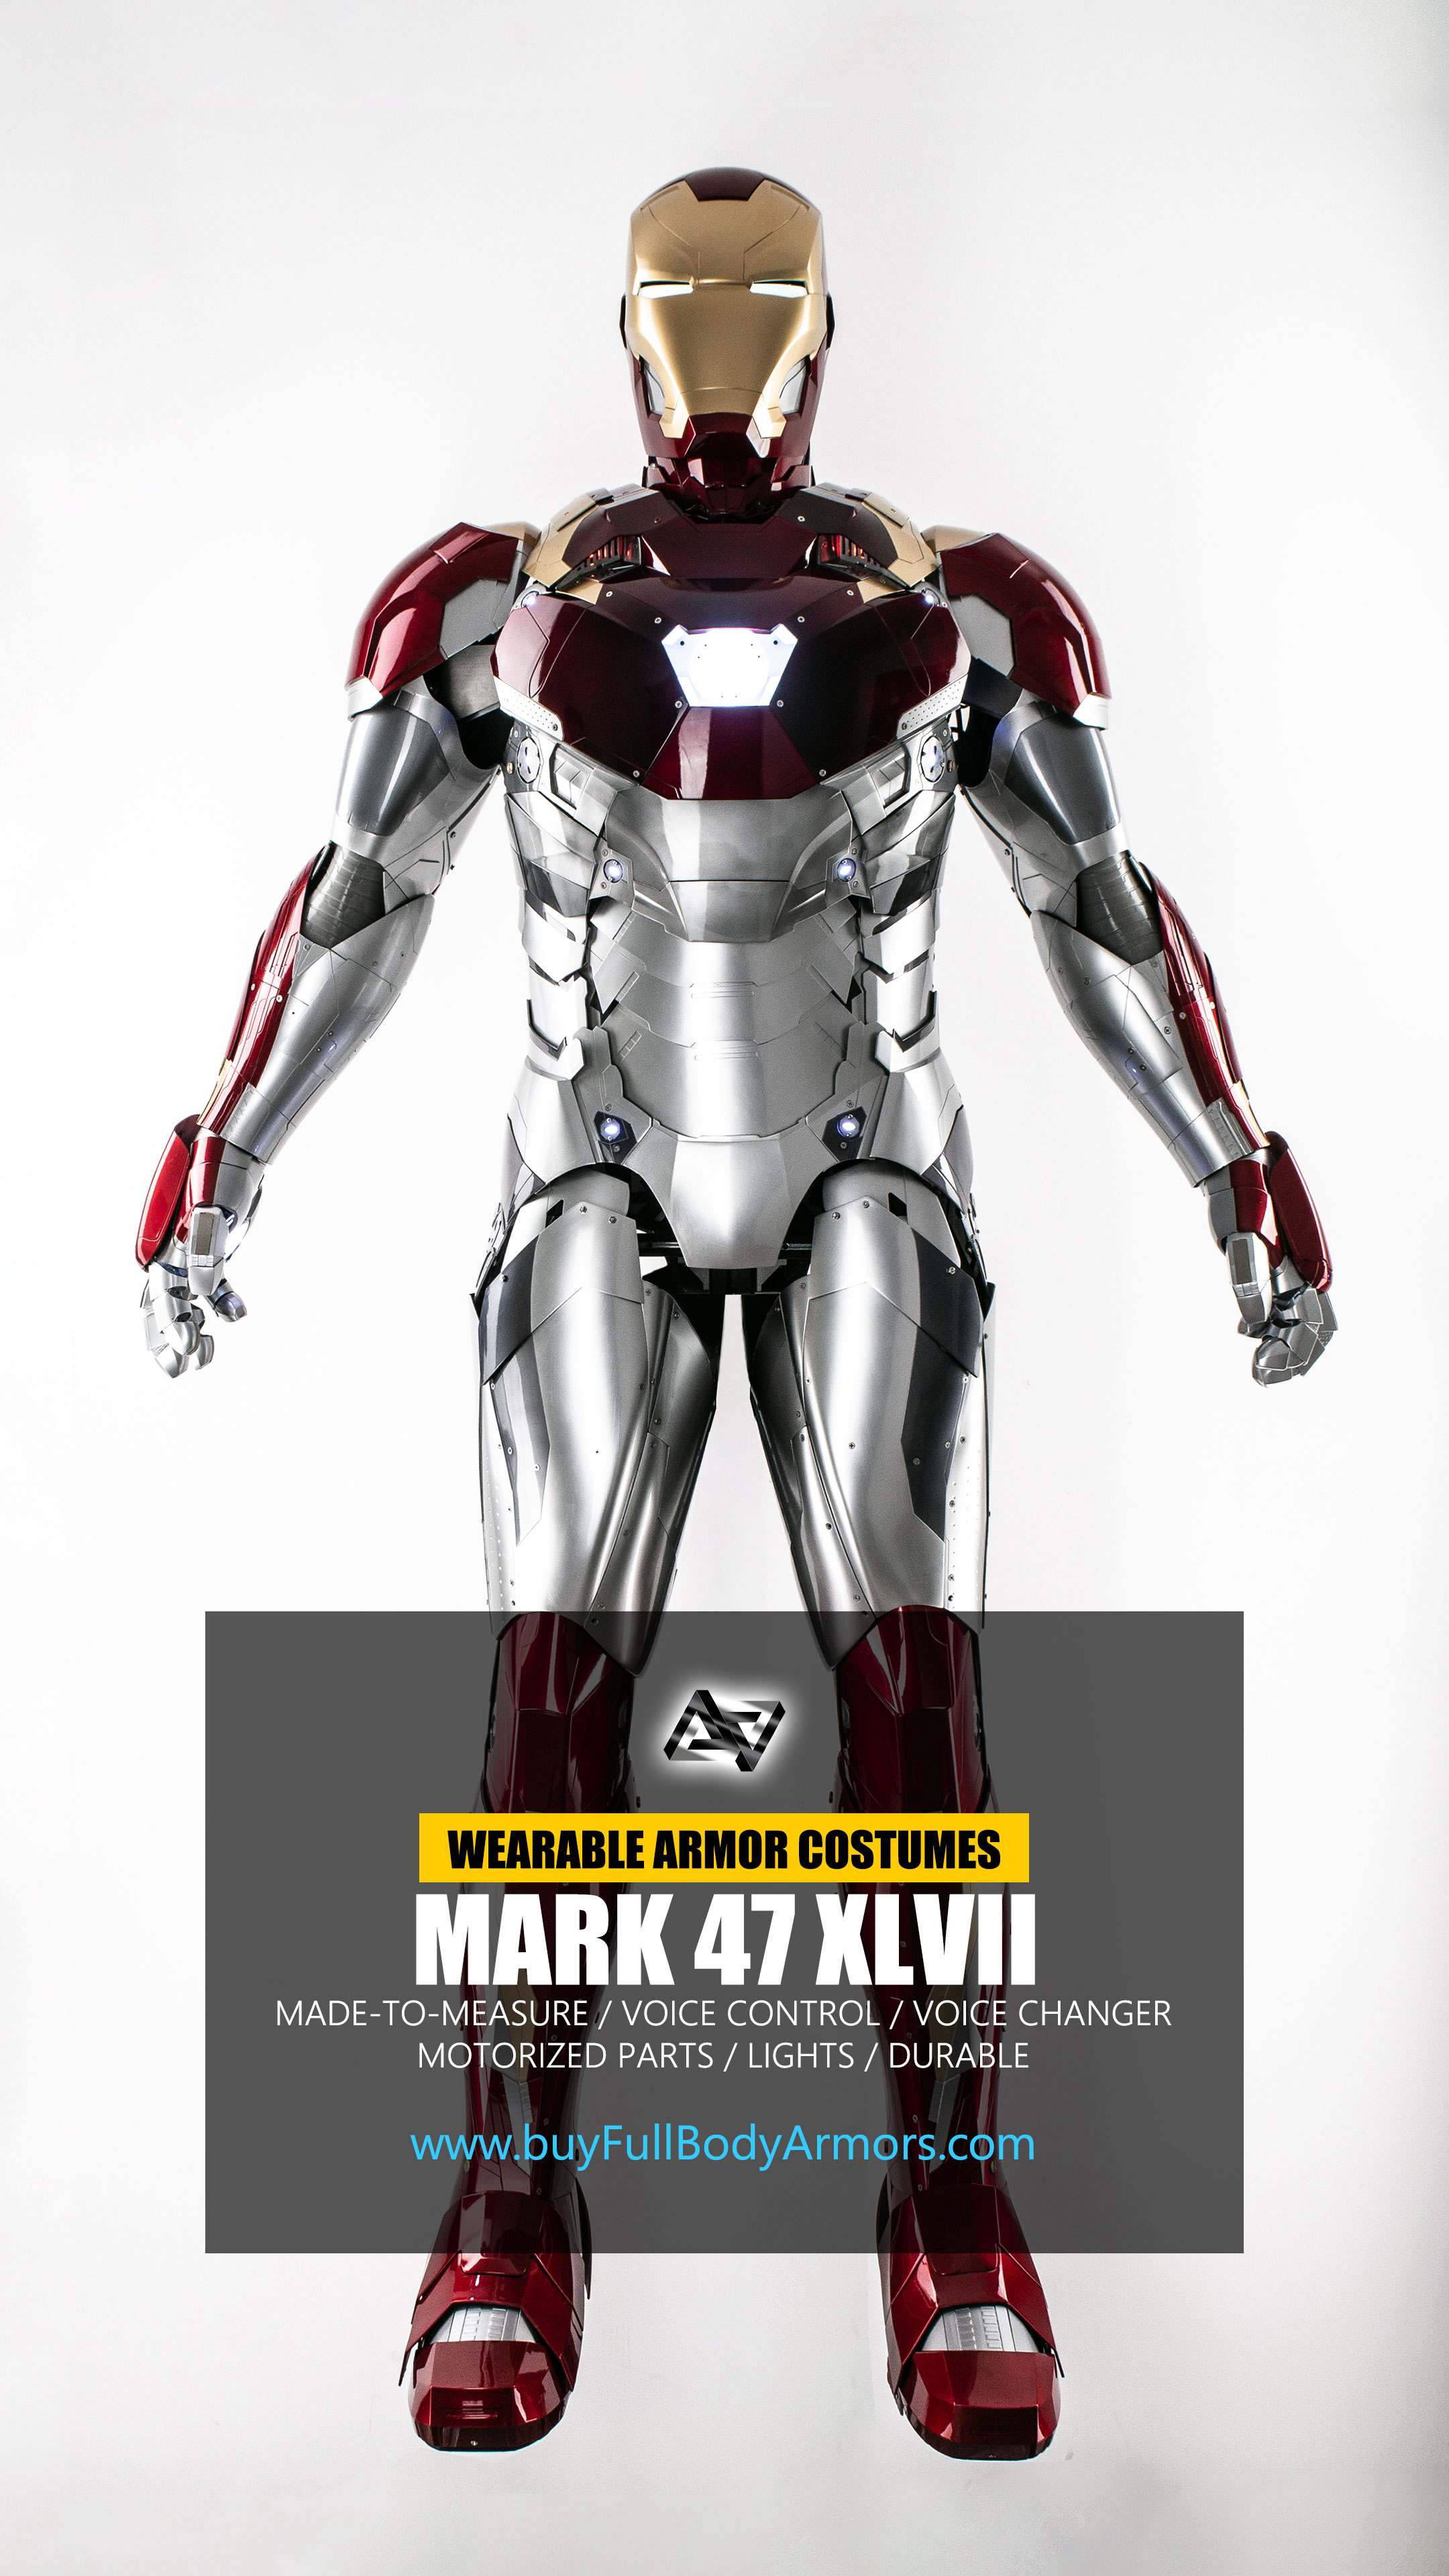 IRON MAN ARMOR COSTUME
MARK 47 XLVII 
Mark 47 is the most advanced armor costume in our history.
It is produced by our state-of-the-art design methodology and building techniques.